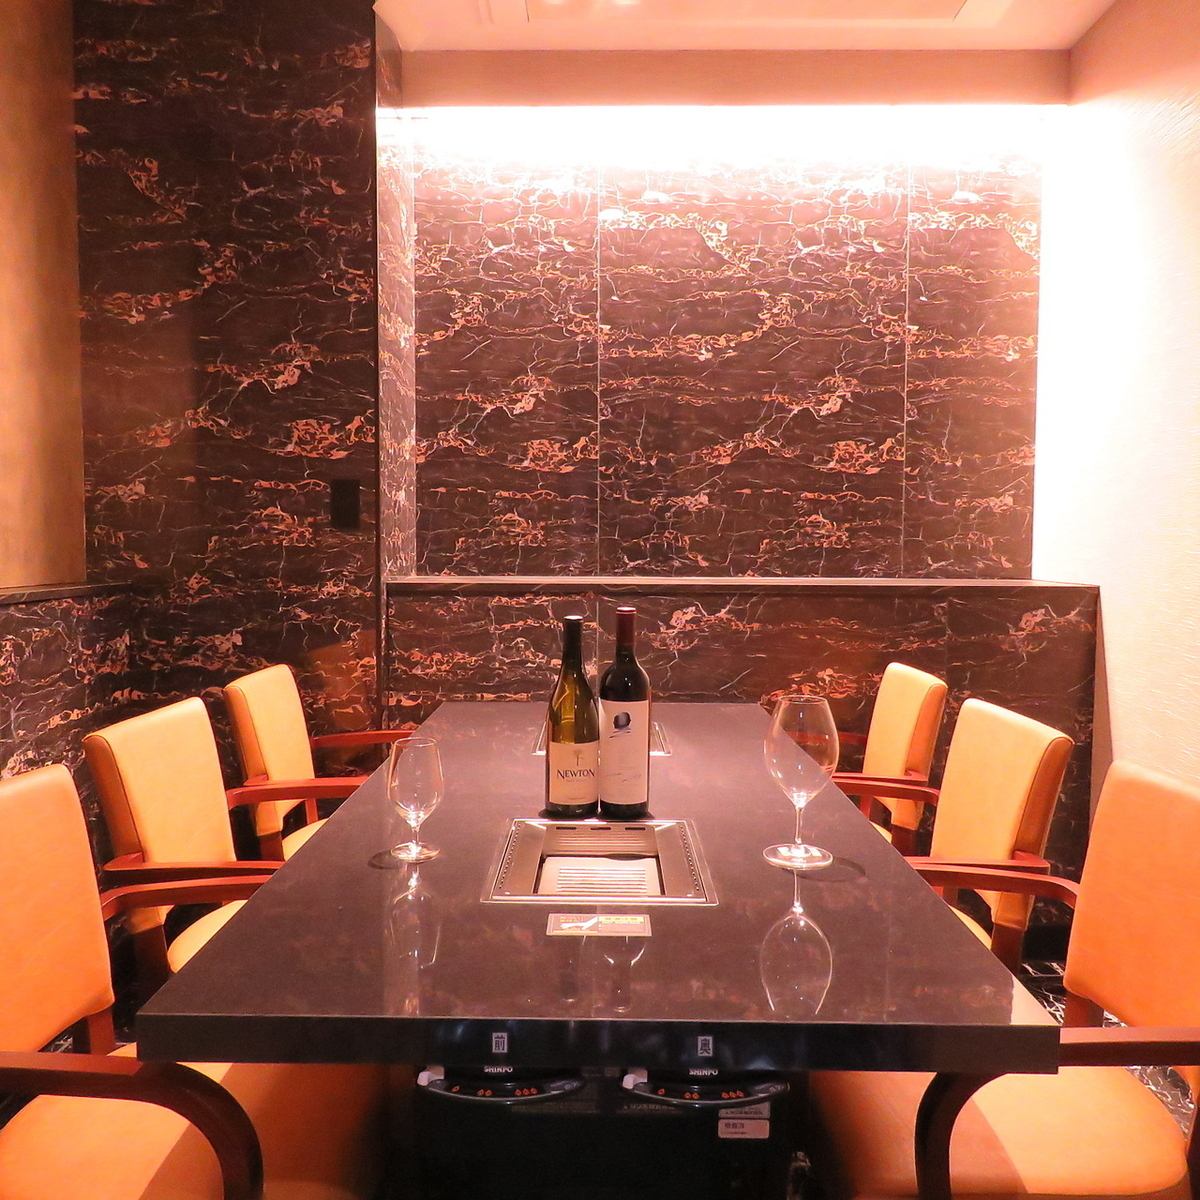 We have a private space that boasts an atmosphere.